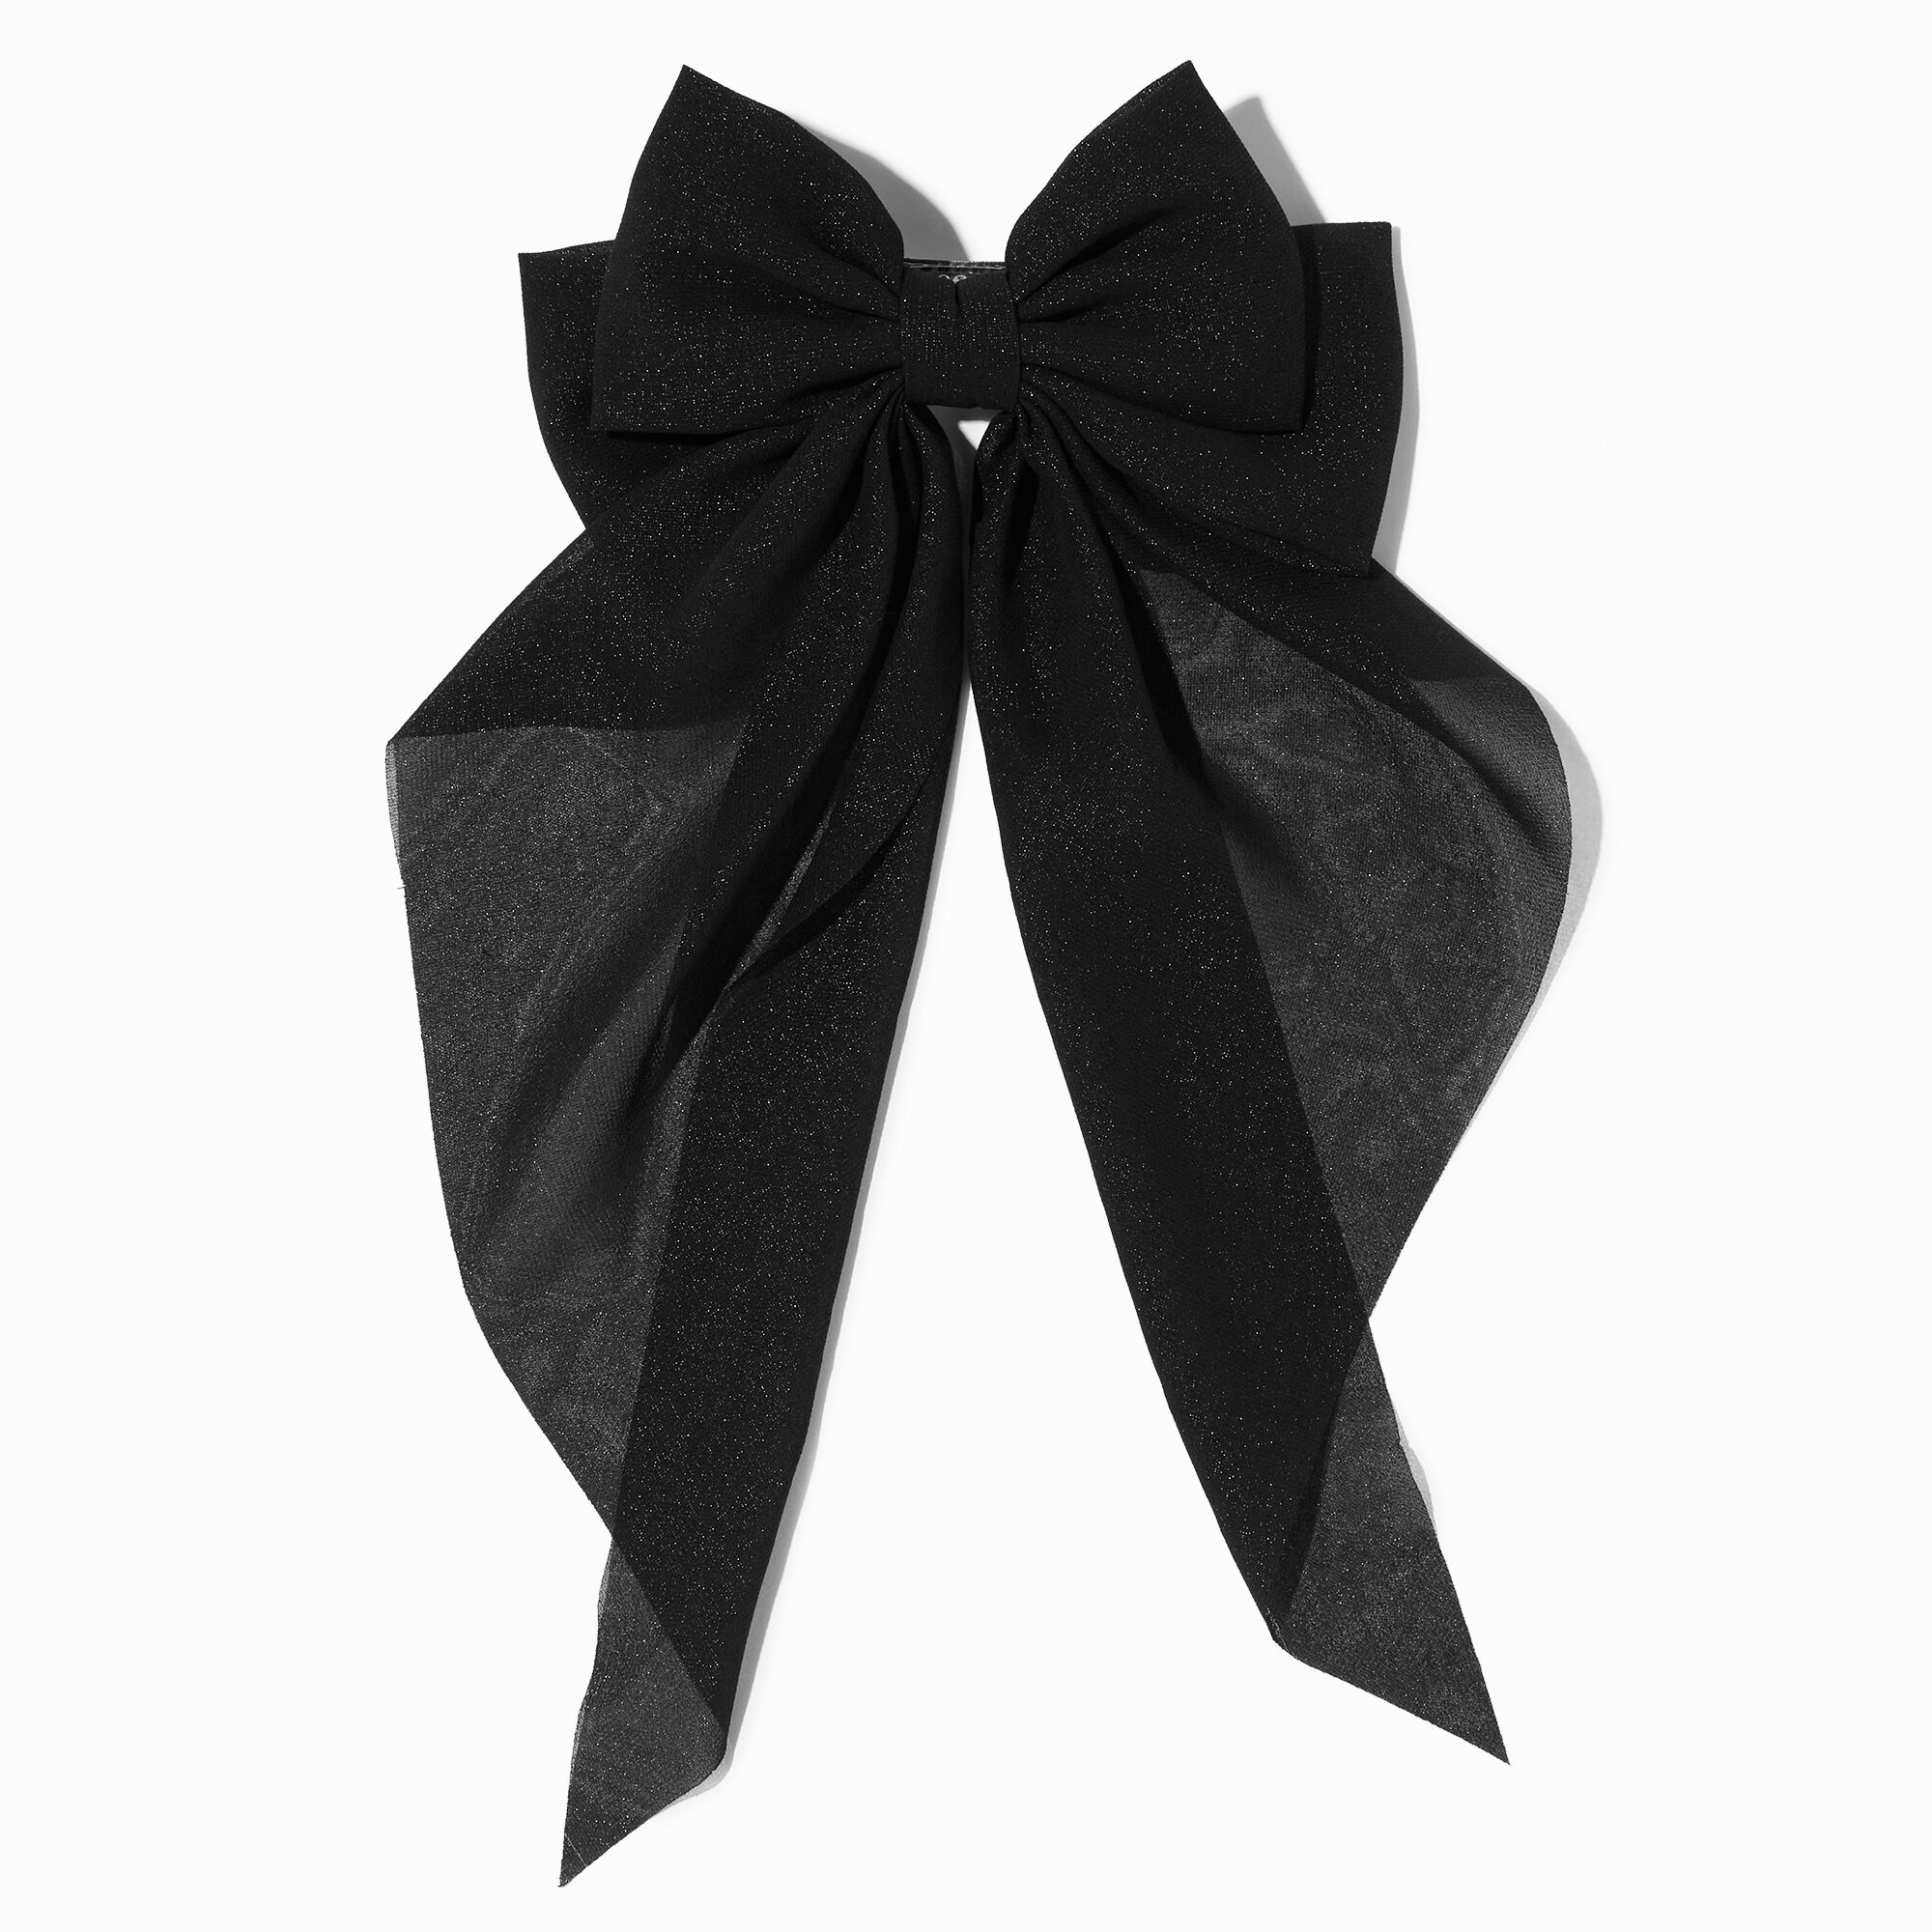 View Claires Bow Long Tail Barrette Hair Clip Black information